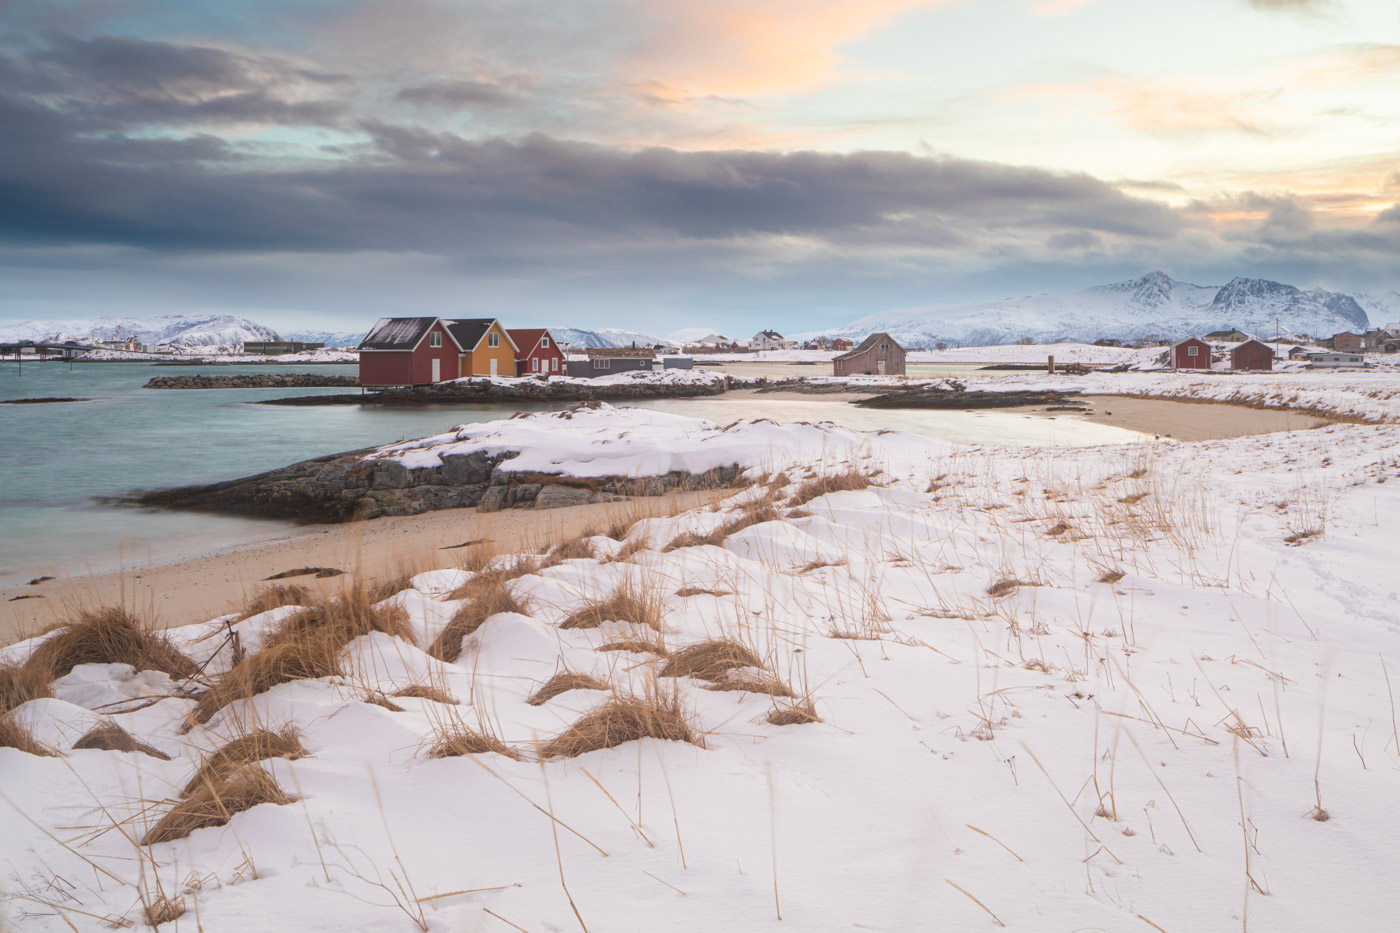 Snow covered beach and coastline on the island of Sommaroy